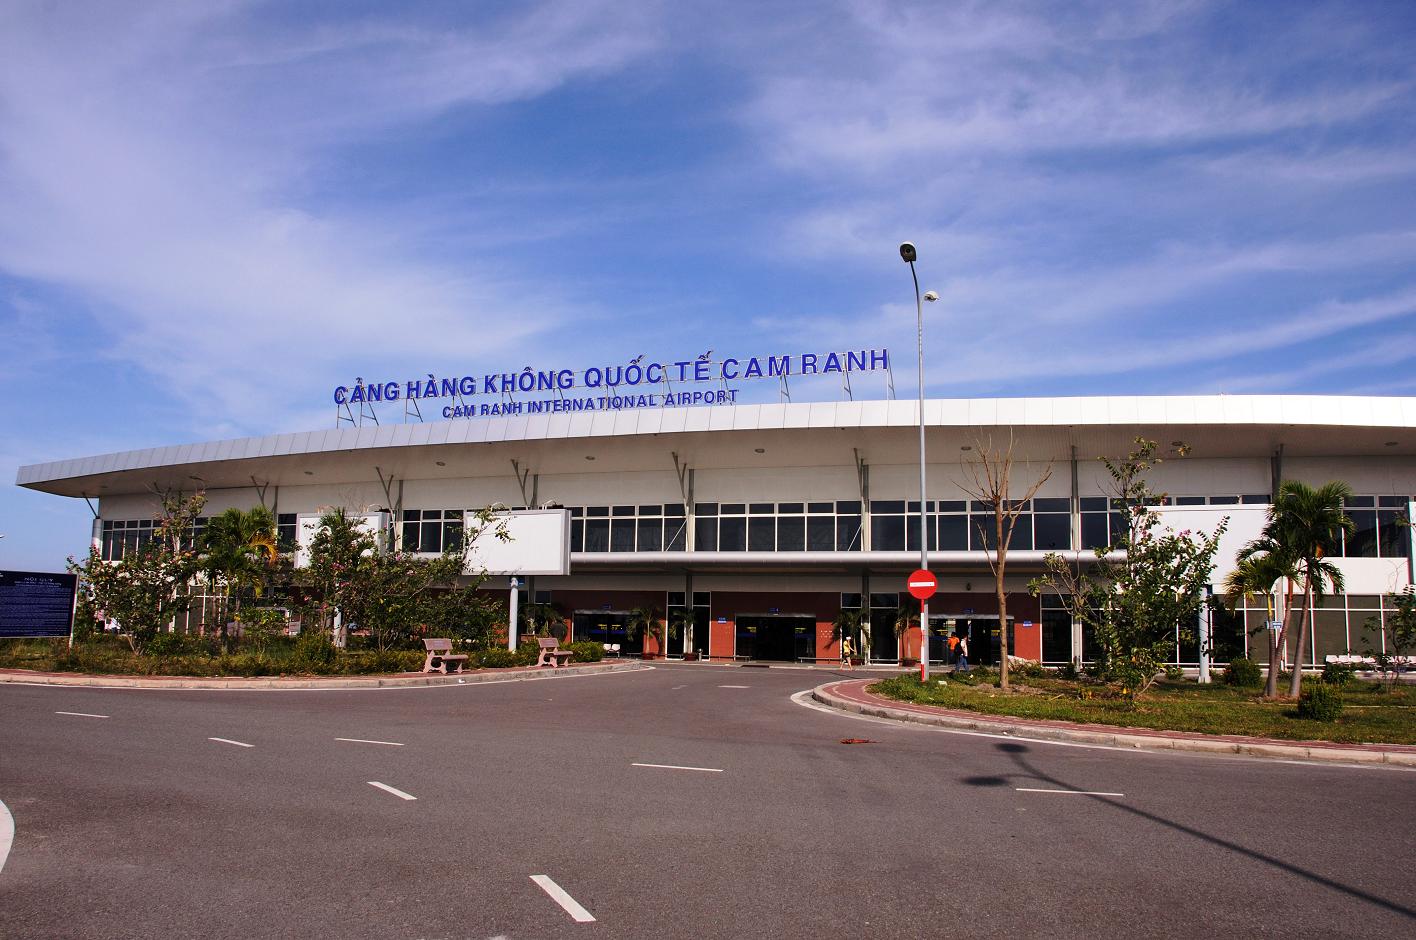 Cam Ranh Airport Allow Foreign Tourists To Enter Again From March 15, 2022 | Visa Application Guidance For Entry Vietnam Through Cam Ranh Airport (Nha Trang City) 2022